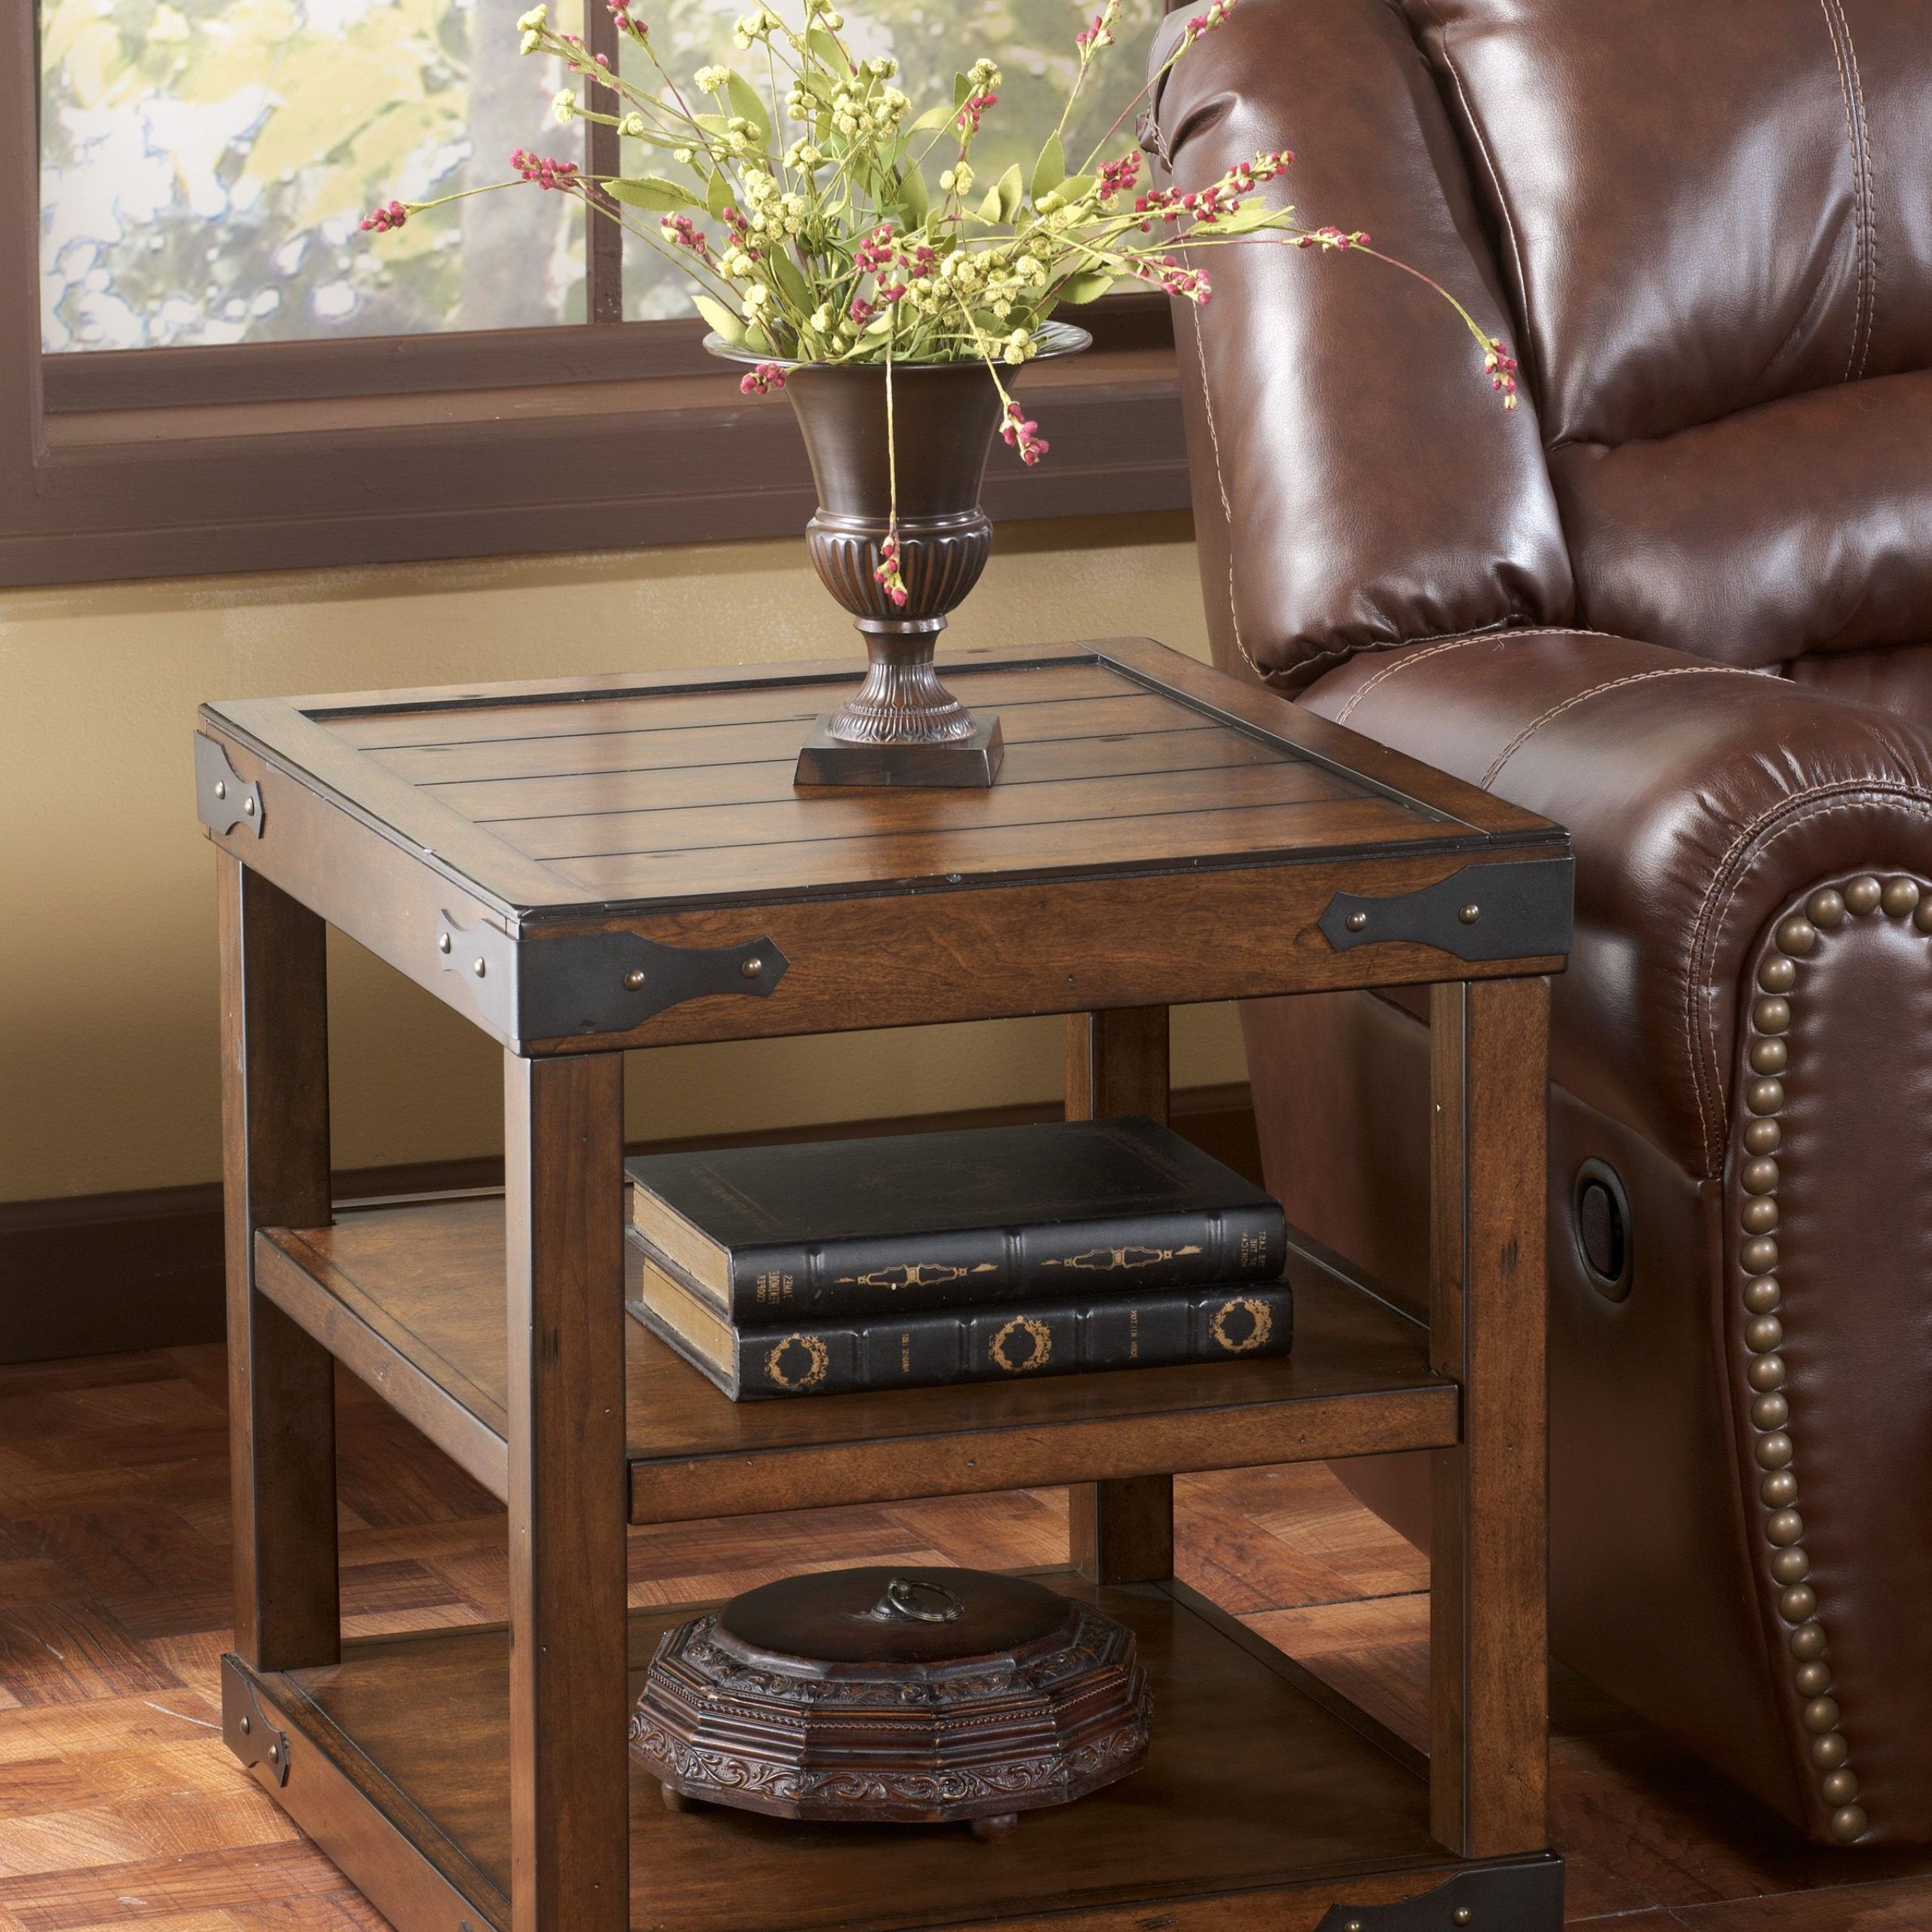 Shepherdsville Traditional Brown Wood Coffee Table Set | Rustic End With Regard To Brown Rustic Coffee Tables (Gallery 16 of 20)